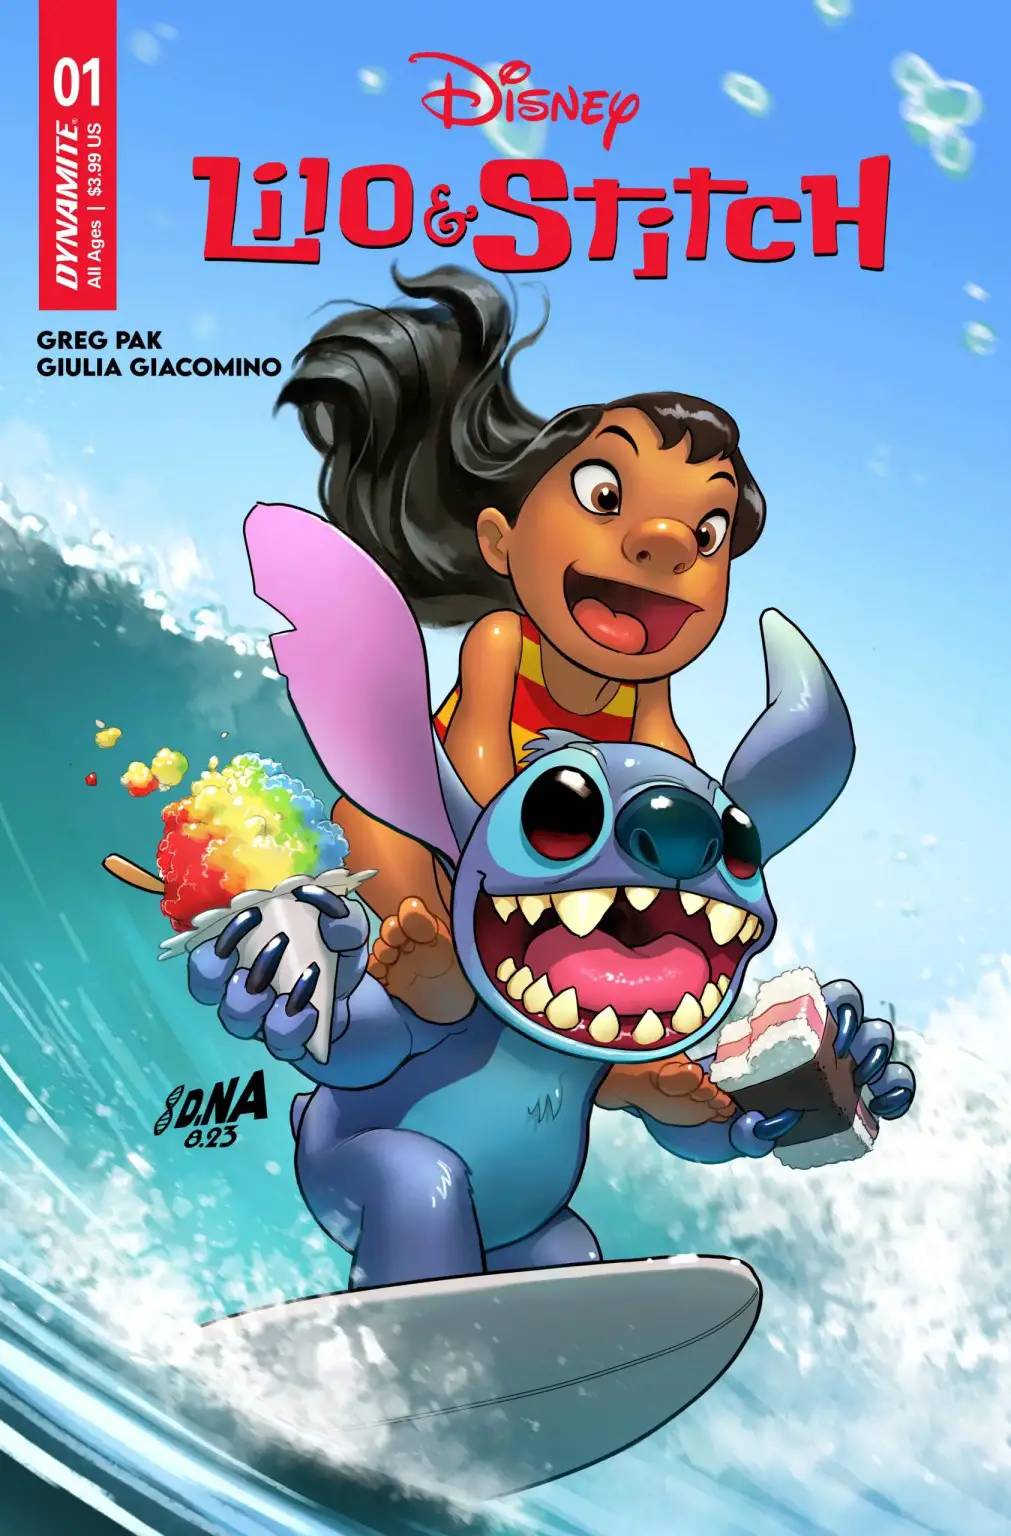 626 Day: Lilo and Stitch Wallpaper - 20th Ann. by Thekingblader995